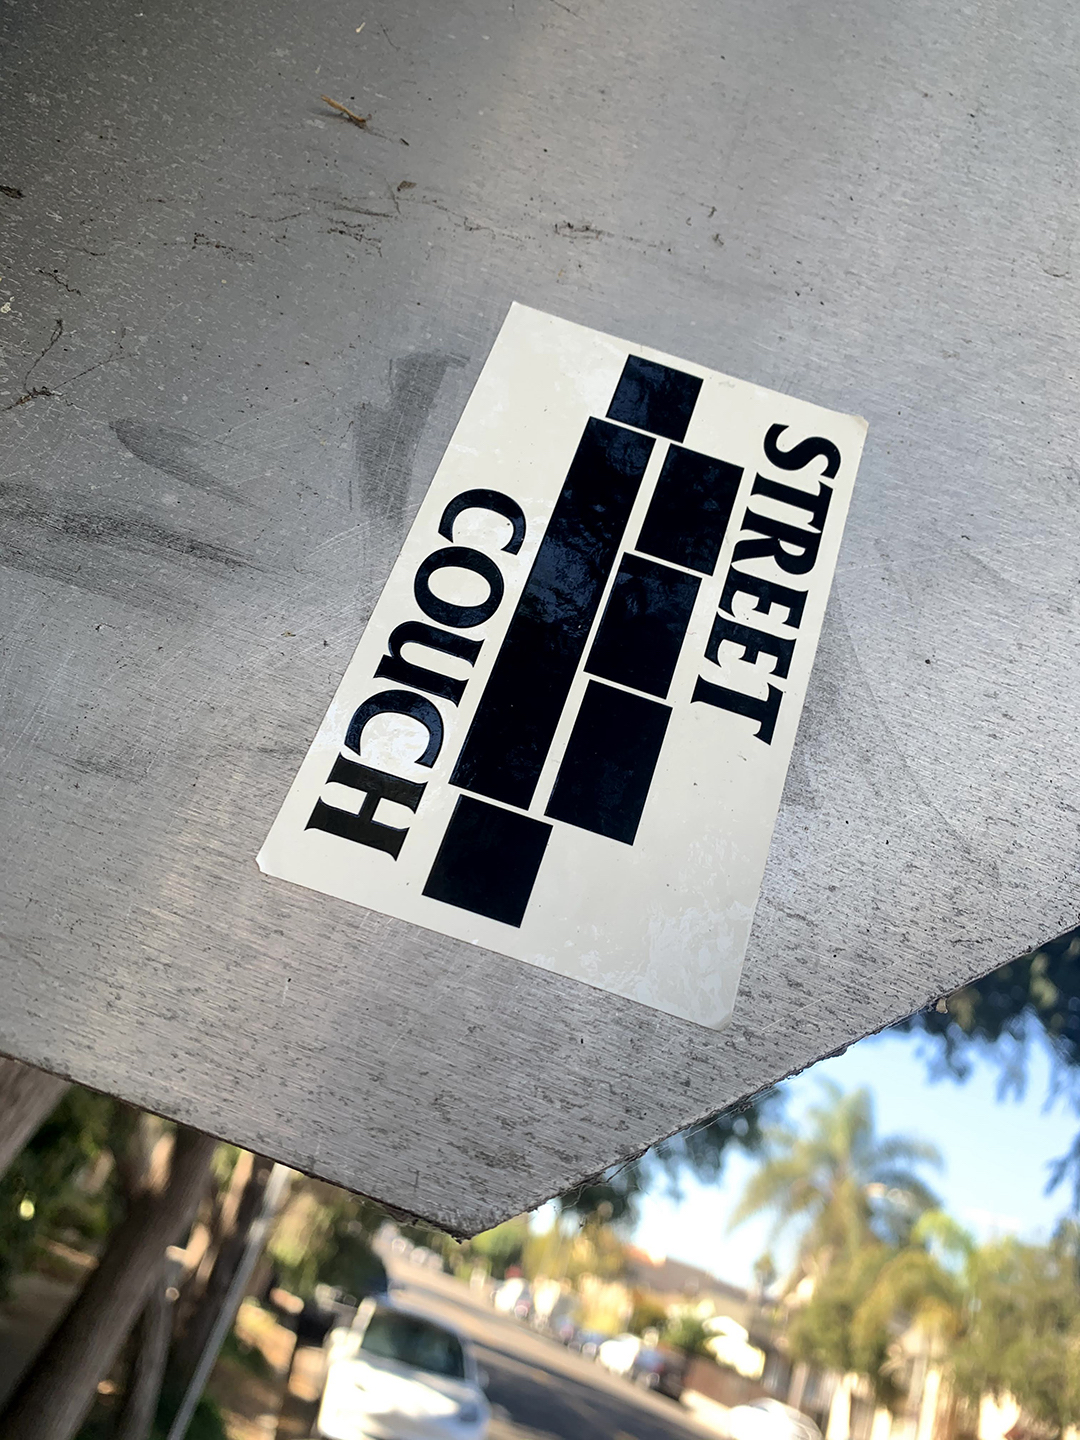 street couch sticker in los angeles